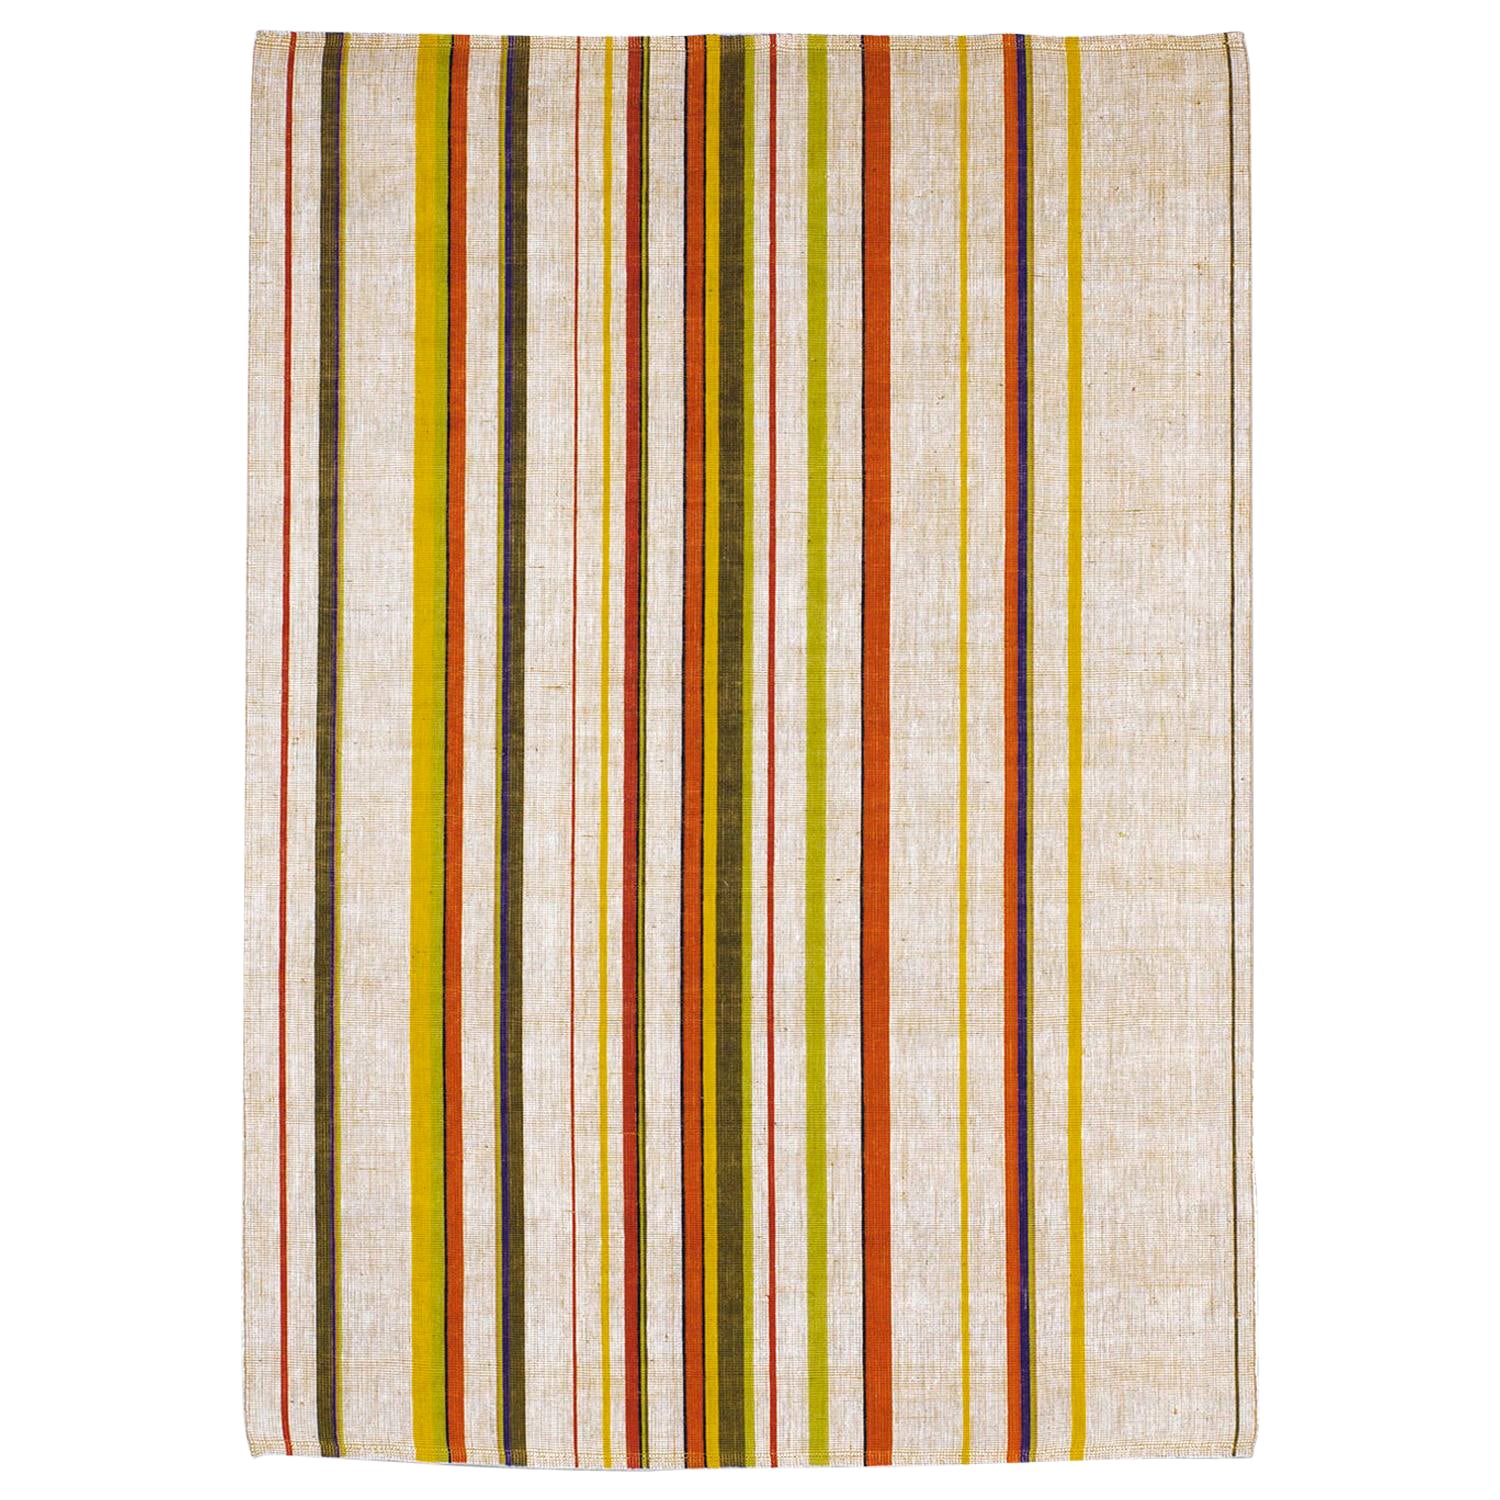 21st Cent Seasonal Style Striped Jute Rug by Deanna Comellini In Stock 200x300cm For Sale